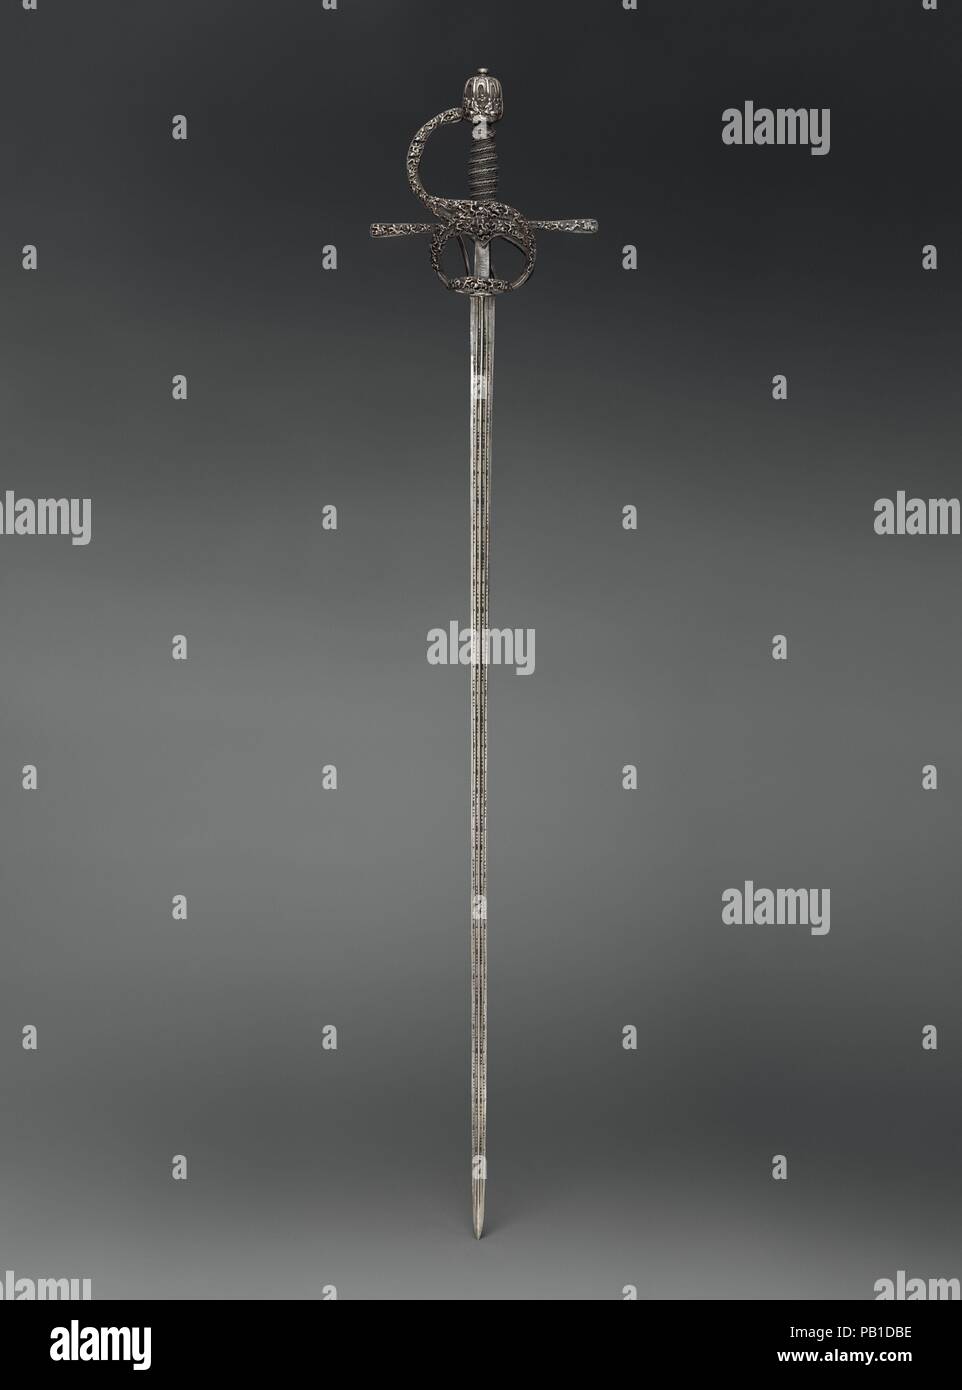 Rapier. Bladesmith: Pietro de Formicano (Italian, Belluno, active ca. 1600). Culture: hilt, Northern European, possibly German; blade, Italian, Belluno. Dimensions: L. 47 1/16 in. (119.5 cm); L. of blade 40 1/2 in. (102.9 cm); W. 9 in. (22.9 cm); Wt. 2 lb. 10 oz (1190 g). Date: ca. 1610-20.  The hilt is of blackened iron and consists of an ovoid pommel surmounted by a flattened button, a knuckle guard, two quillons slightly expanding toward rounded tips, arms of the hilt, and two side rings, the upper one connected to the knuckle guard by a short diagonal branch. The wooden grip of oval sectio Stock Photo